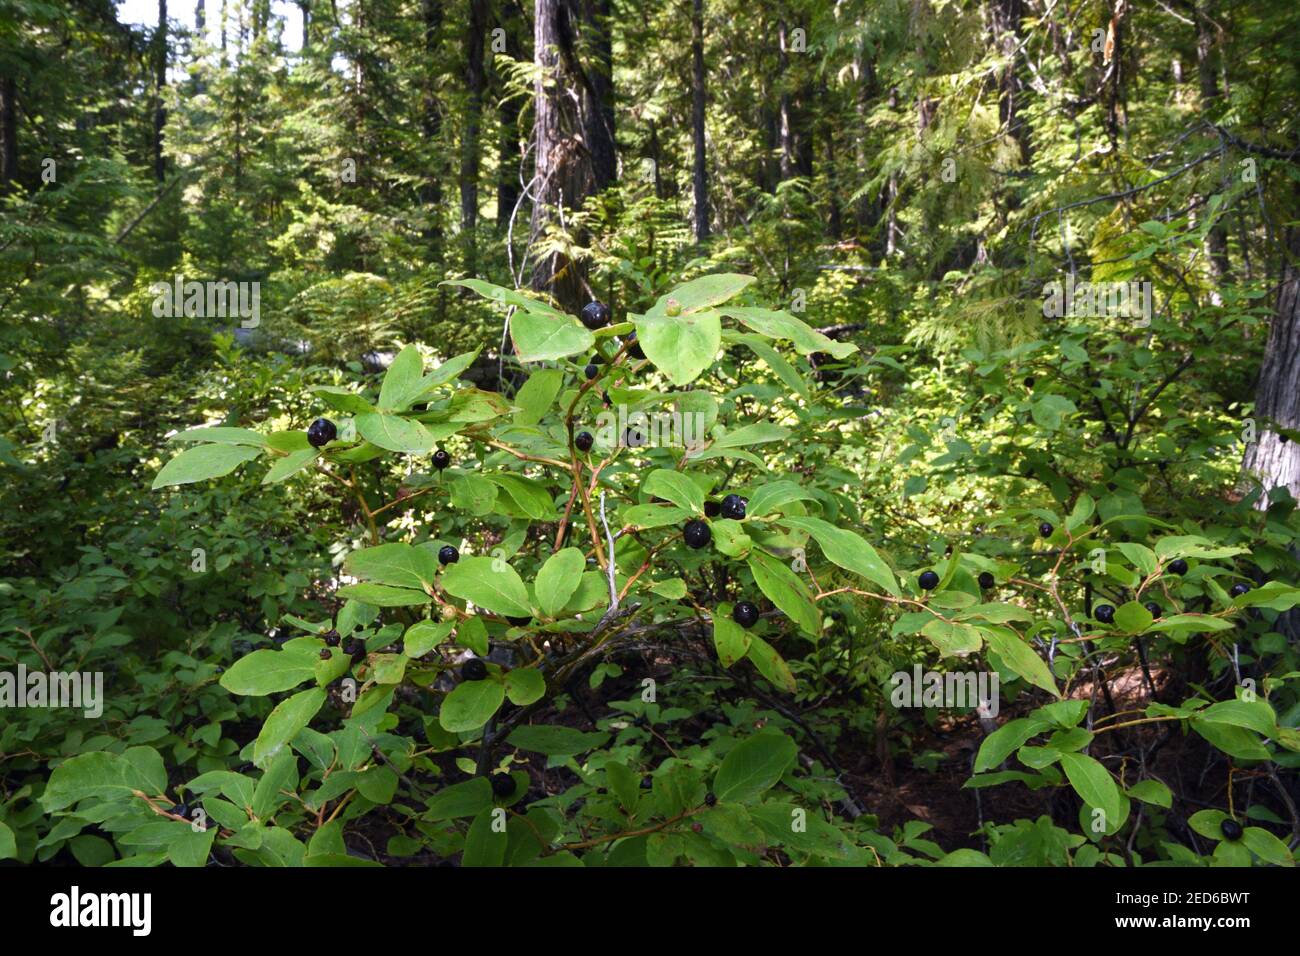 Huckleberry bushes in a mixed conifer forest proposed for clearcut, unit 41, Black Ram project. Kootenai National Forest, MT. (Photo by Randy Beacham) Stock Photo